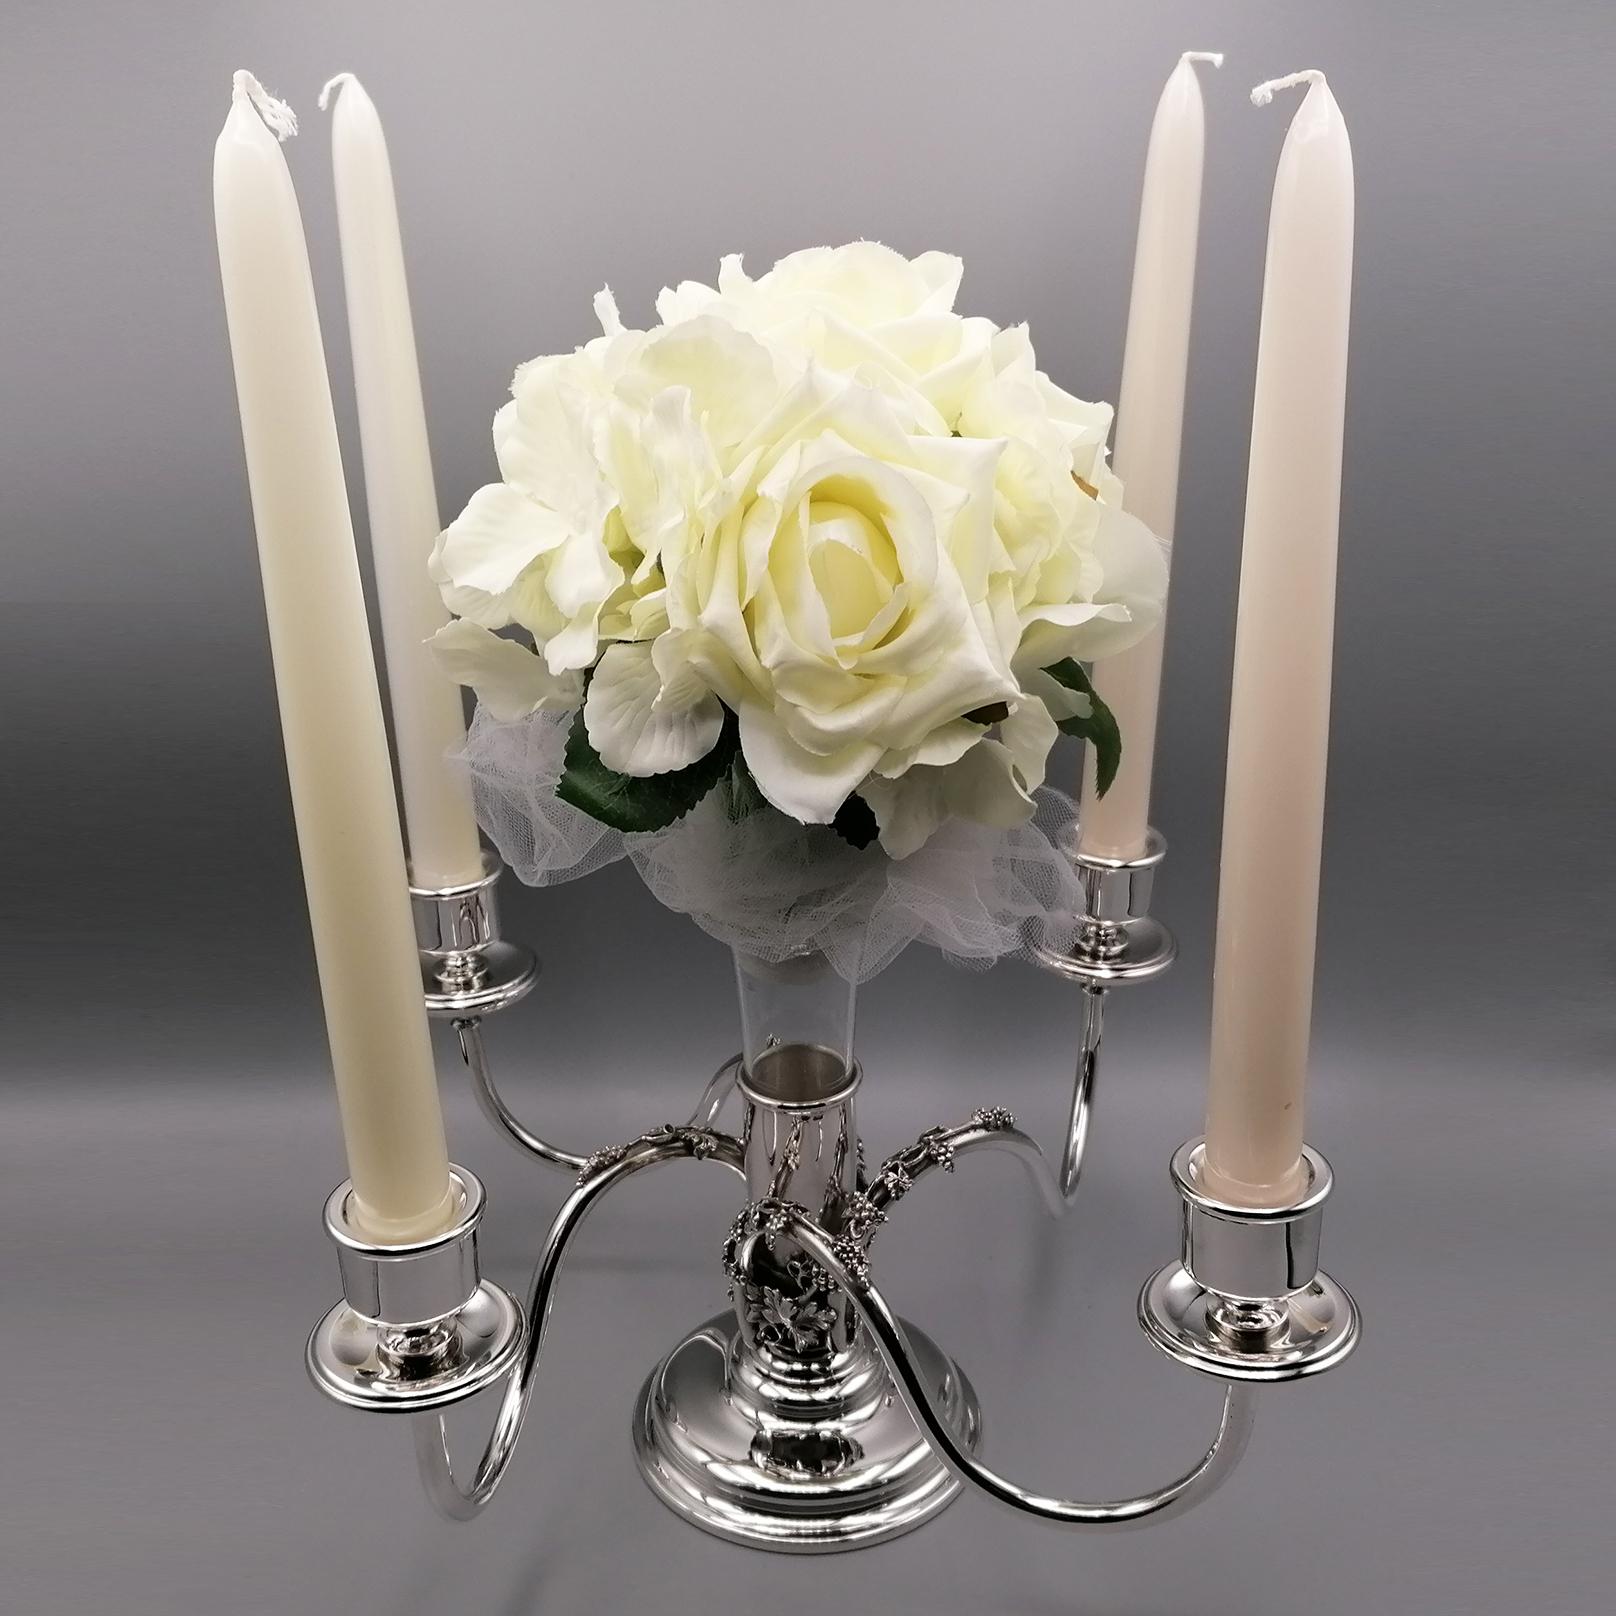 Gourgeous and elegant Candelabra - Centerpiece with 4 lights in solid 800 silver. The base is round and the central stem is the seat for a glass flower holder. From the central stem there are 4 arms with a smooth round section ending with the candle